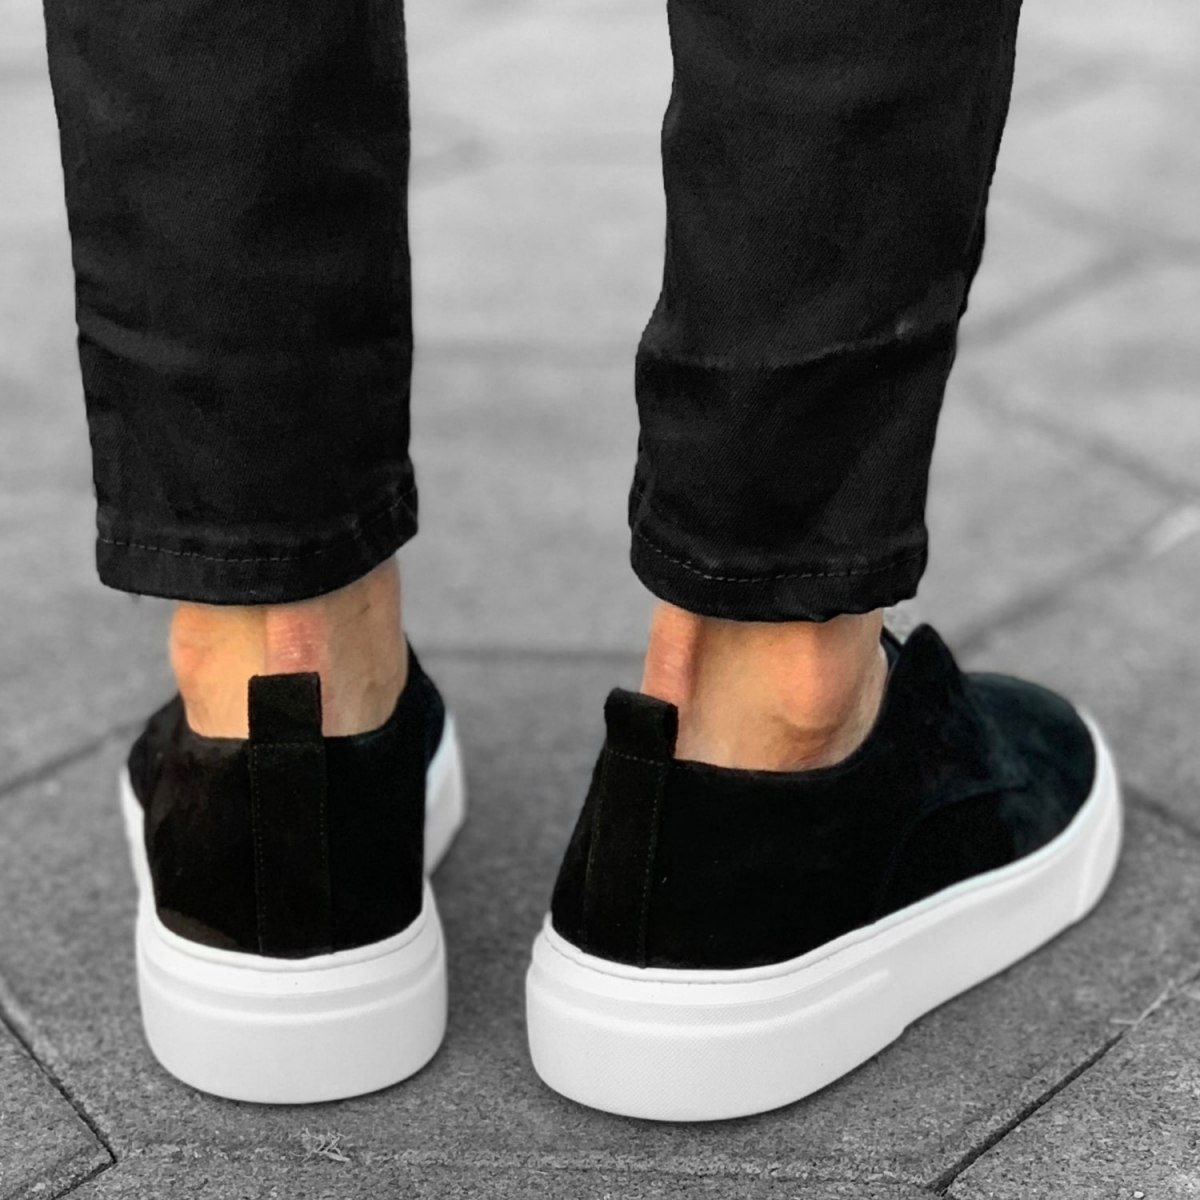 Men's Designer Suede Leather Sneakers Shoes in Black and White | Martin Valen